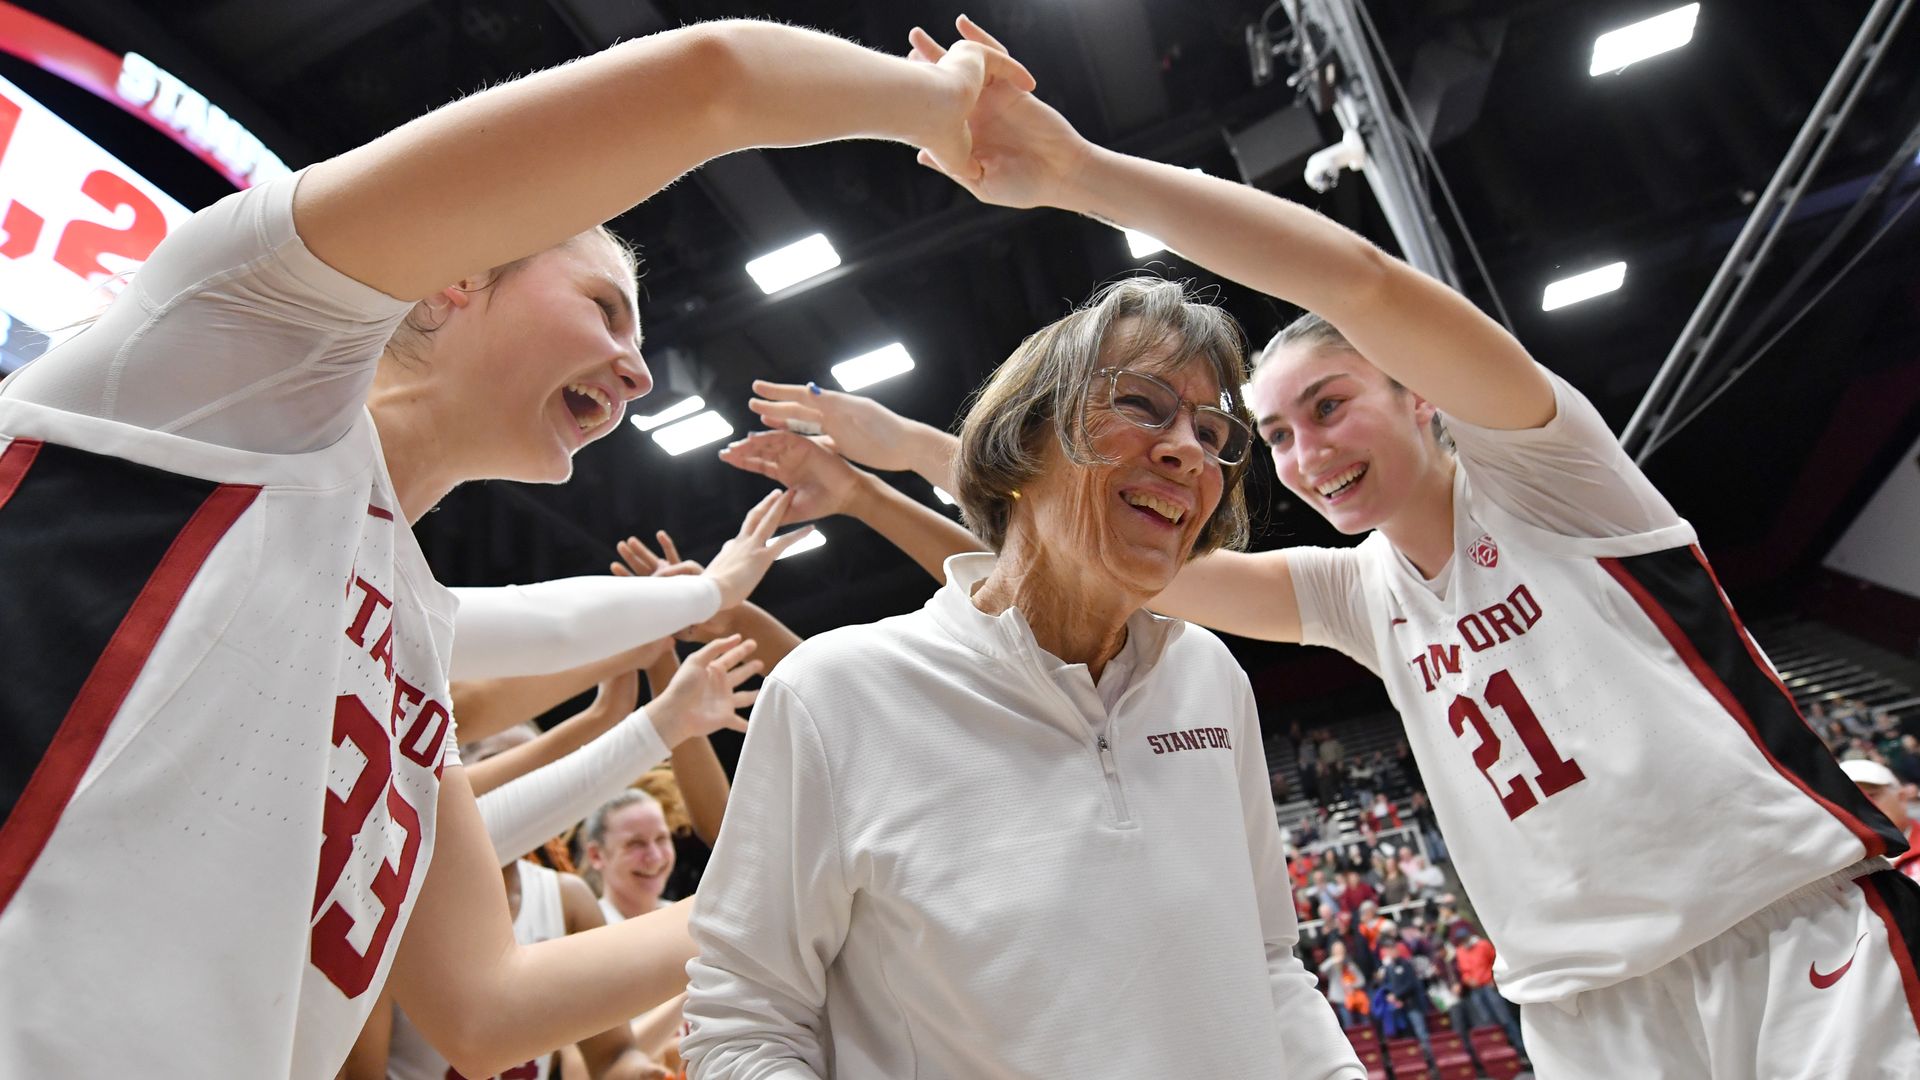  Stanford Cardinal head coach Tara VanDerveer celebrates at Stanford Maples Pavilion after a game against the Oregon Ducks. Tara VanDerveer ties Mike Krzyzewski with 1,202 NCAA career wins at Stanford Maples Pavilion on January 19, 2024 in Palo Alto, California. 